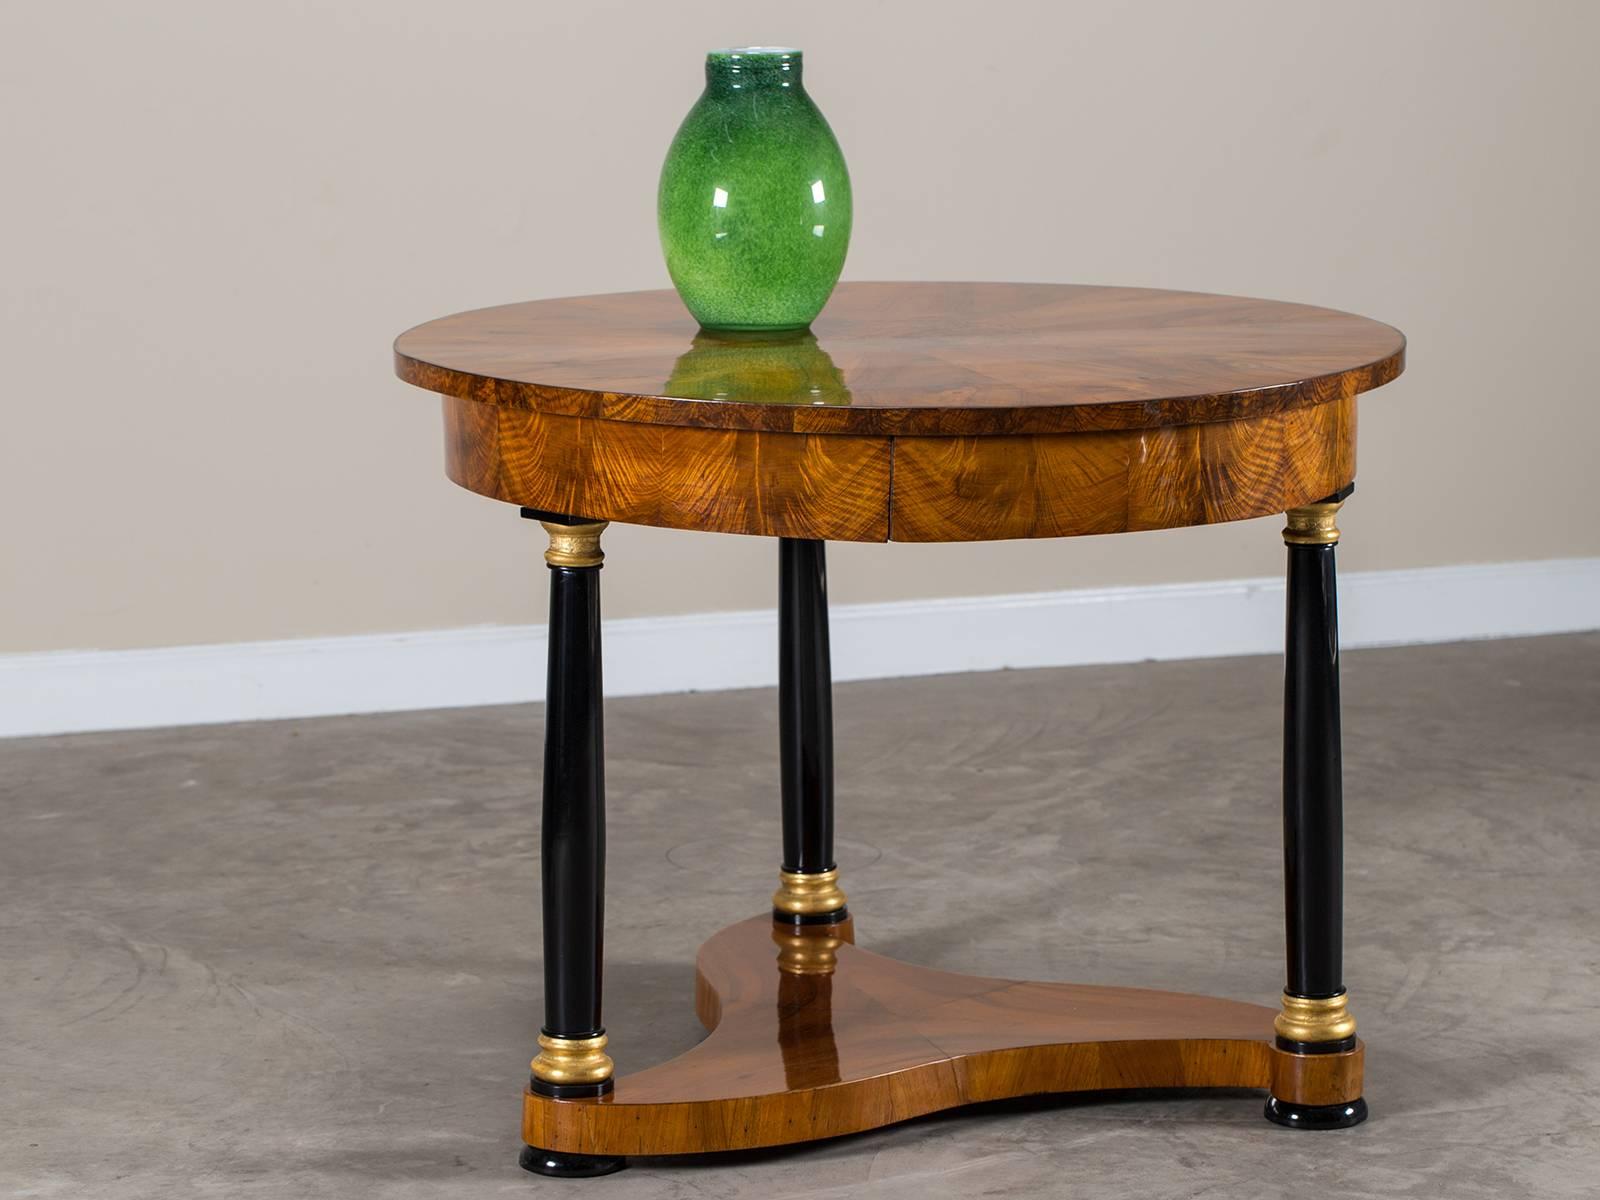 Receive our new selections direct from 1stdibs by email each week. Please click Follow Dealer below and see them first!

The clean powerful lines of this antique German walnut table circa 1825 possess a modern feel quite at home in today's